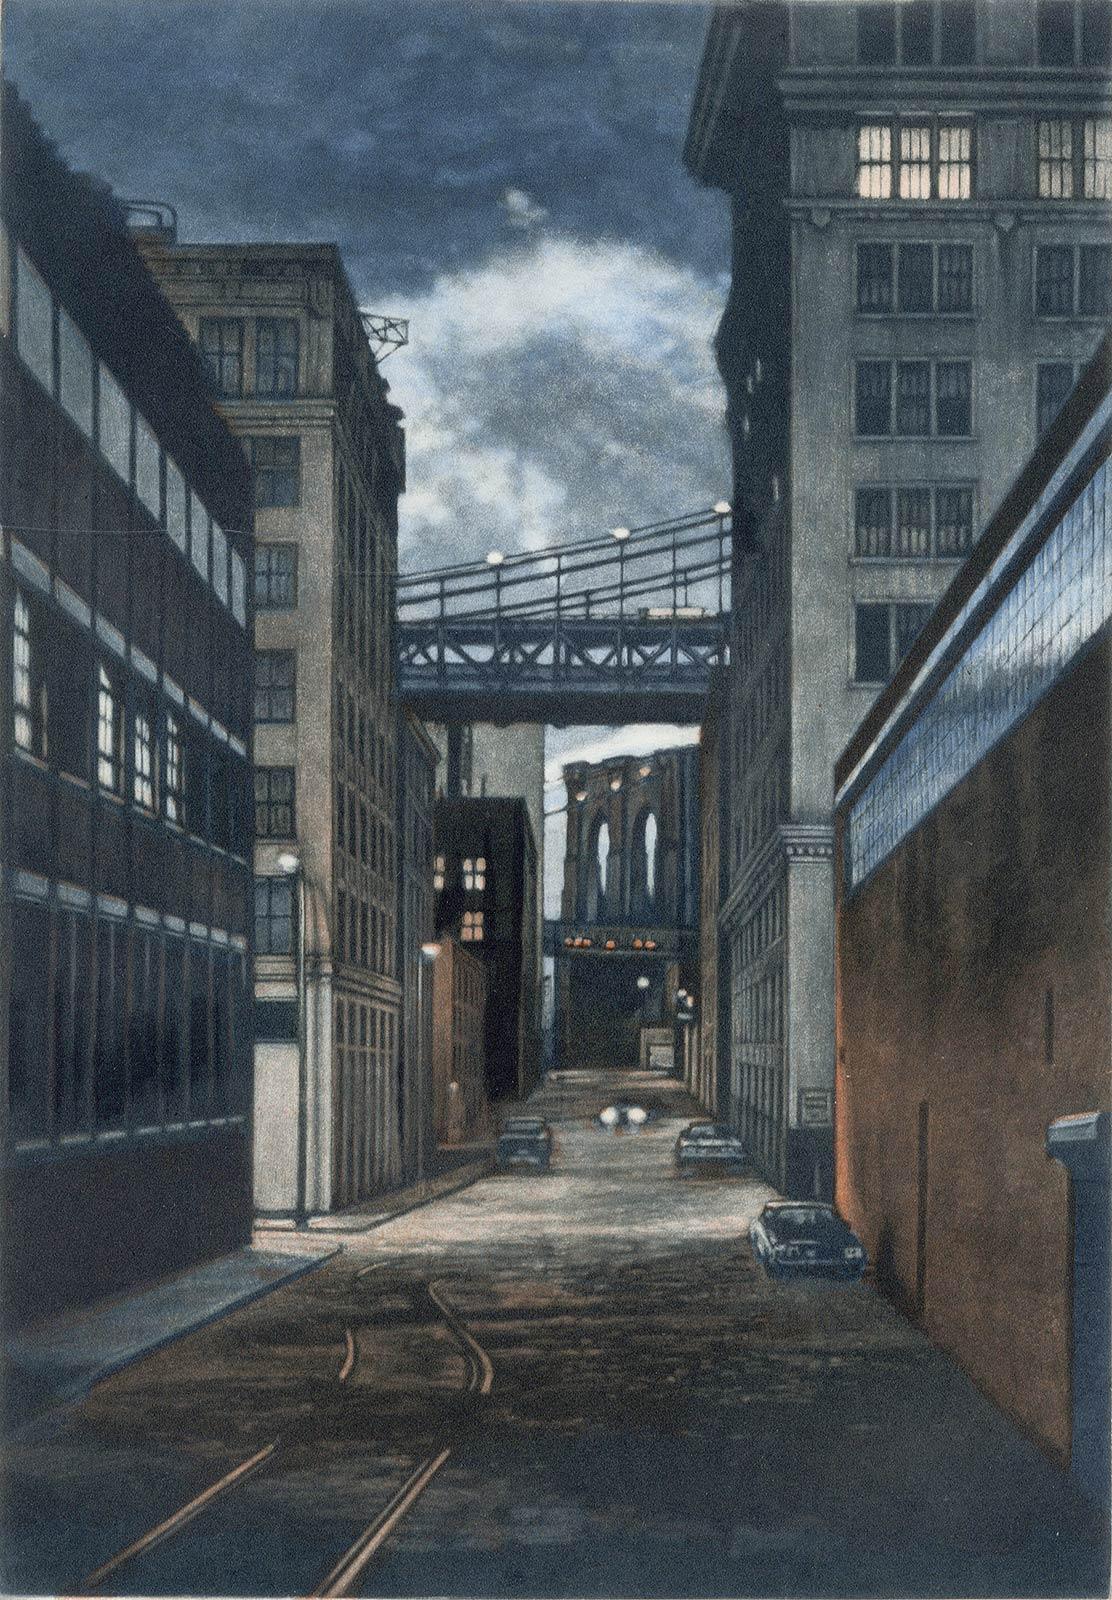 Plymouth Street ( a twilight scene is set in the Brooklyn section of DUMBO)